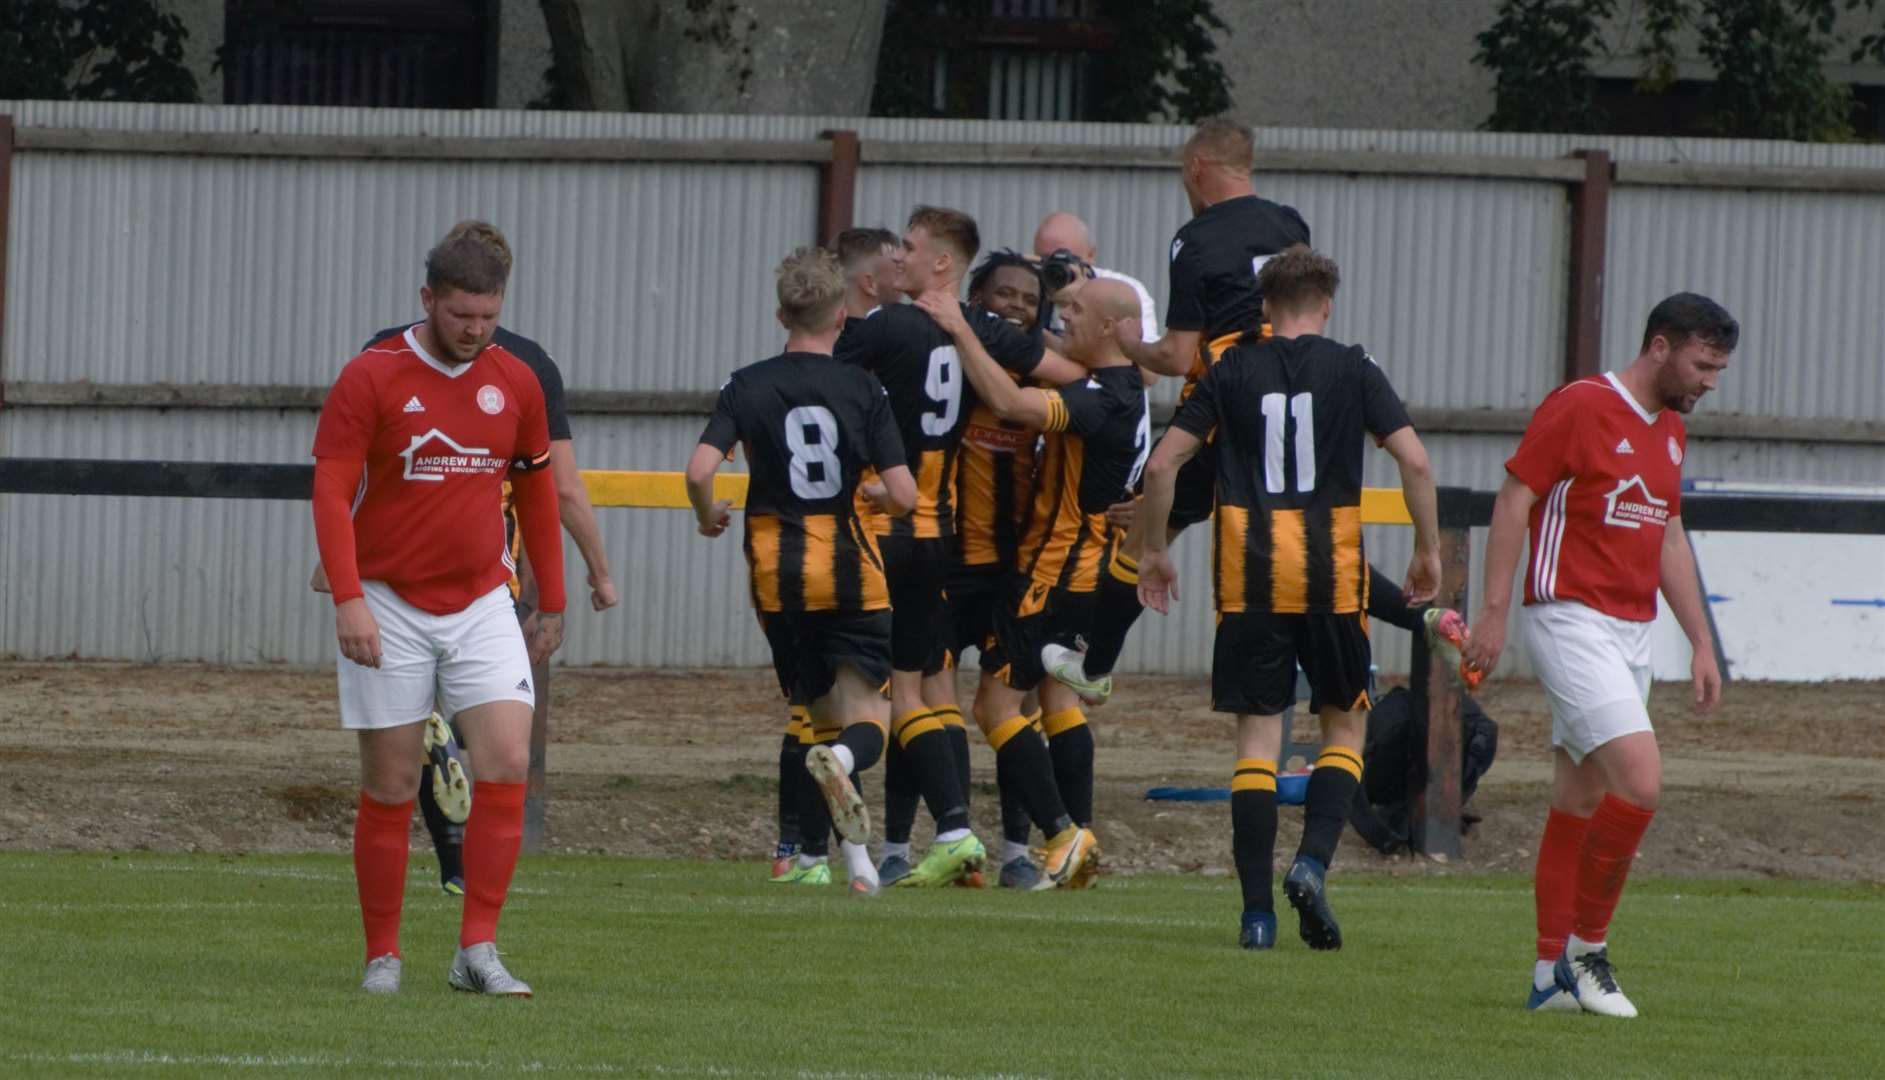 Celebrations all round as Caiden Imbert Thomas makes it 2-0 to Huntly from close range. Picture: Derek Lowe